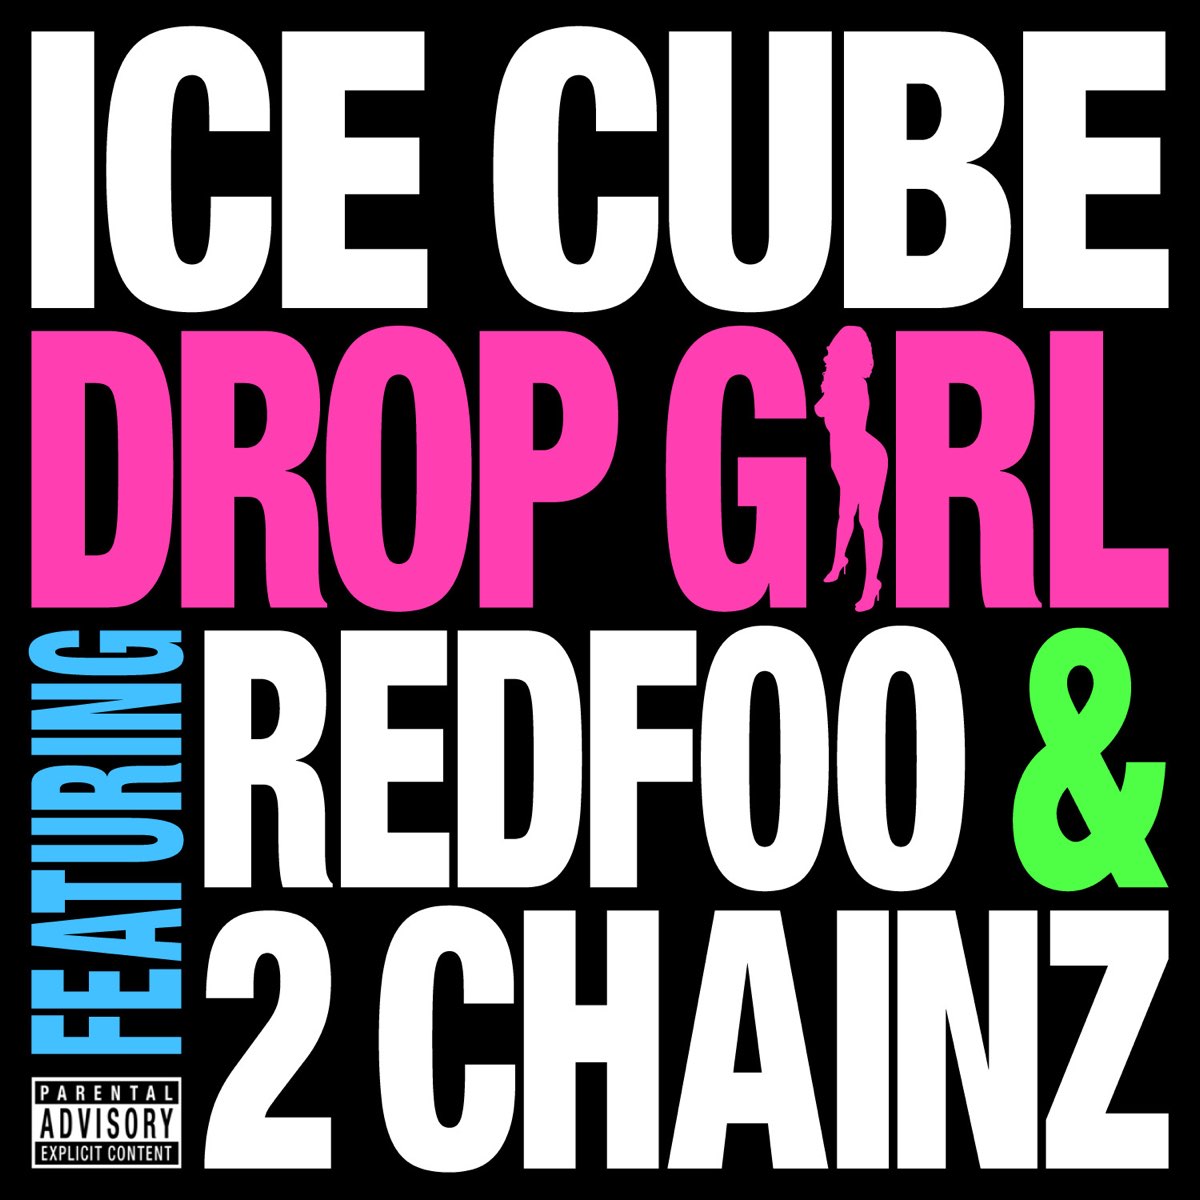 Ice Cube crowded. Ice Cube 2 Chainz. Music Cube. Петух Cube Drop out. Cube feat